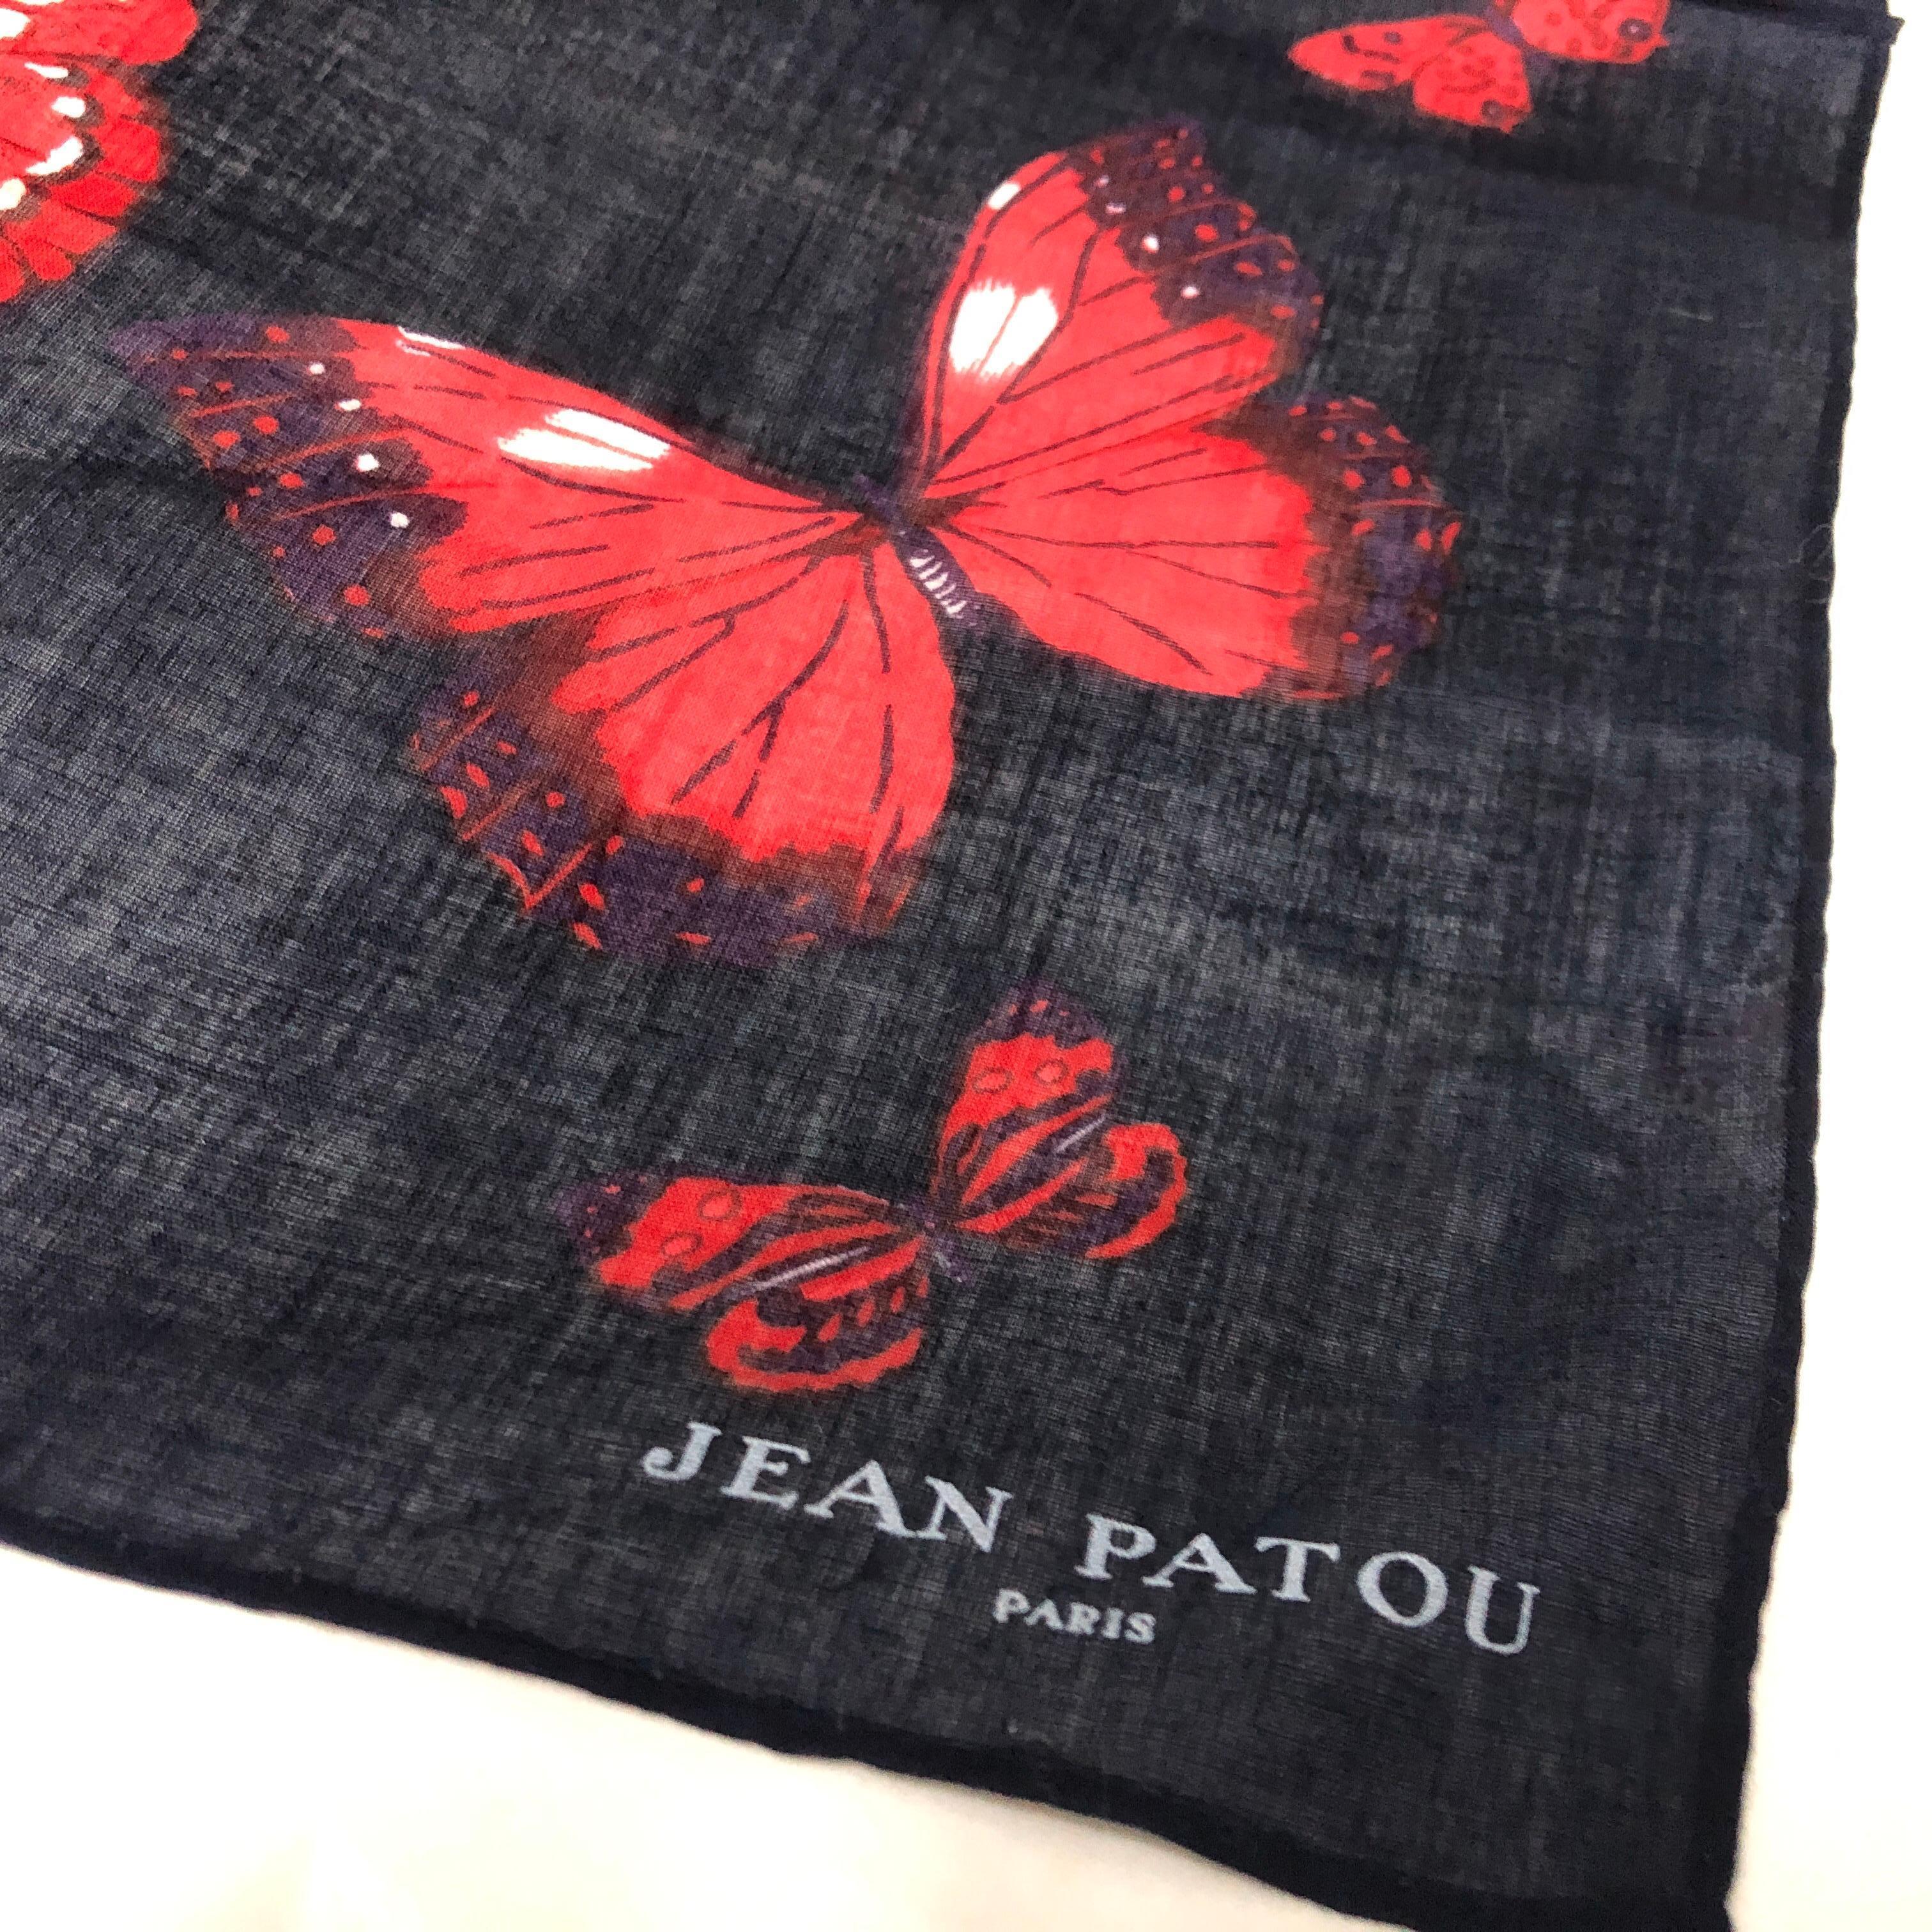 A vintage cotton scarf designed and produced by Jean Patou, it's in perfect conditions